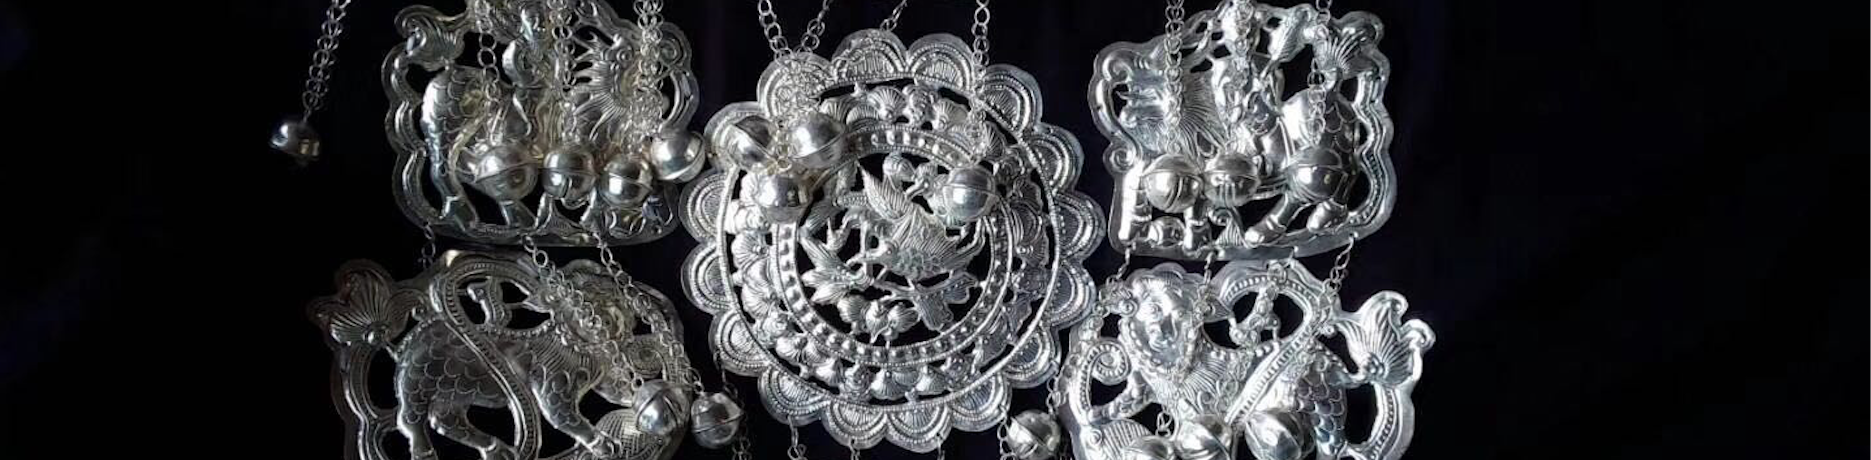 A piece of Asian filigree created by silversmiths in the Chinese Kongbai Village.